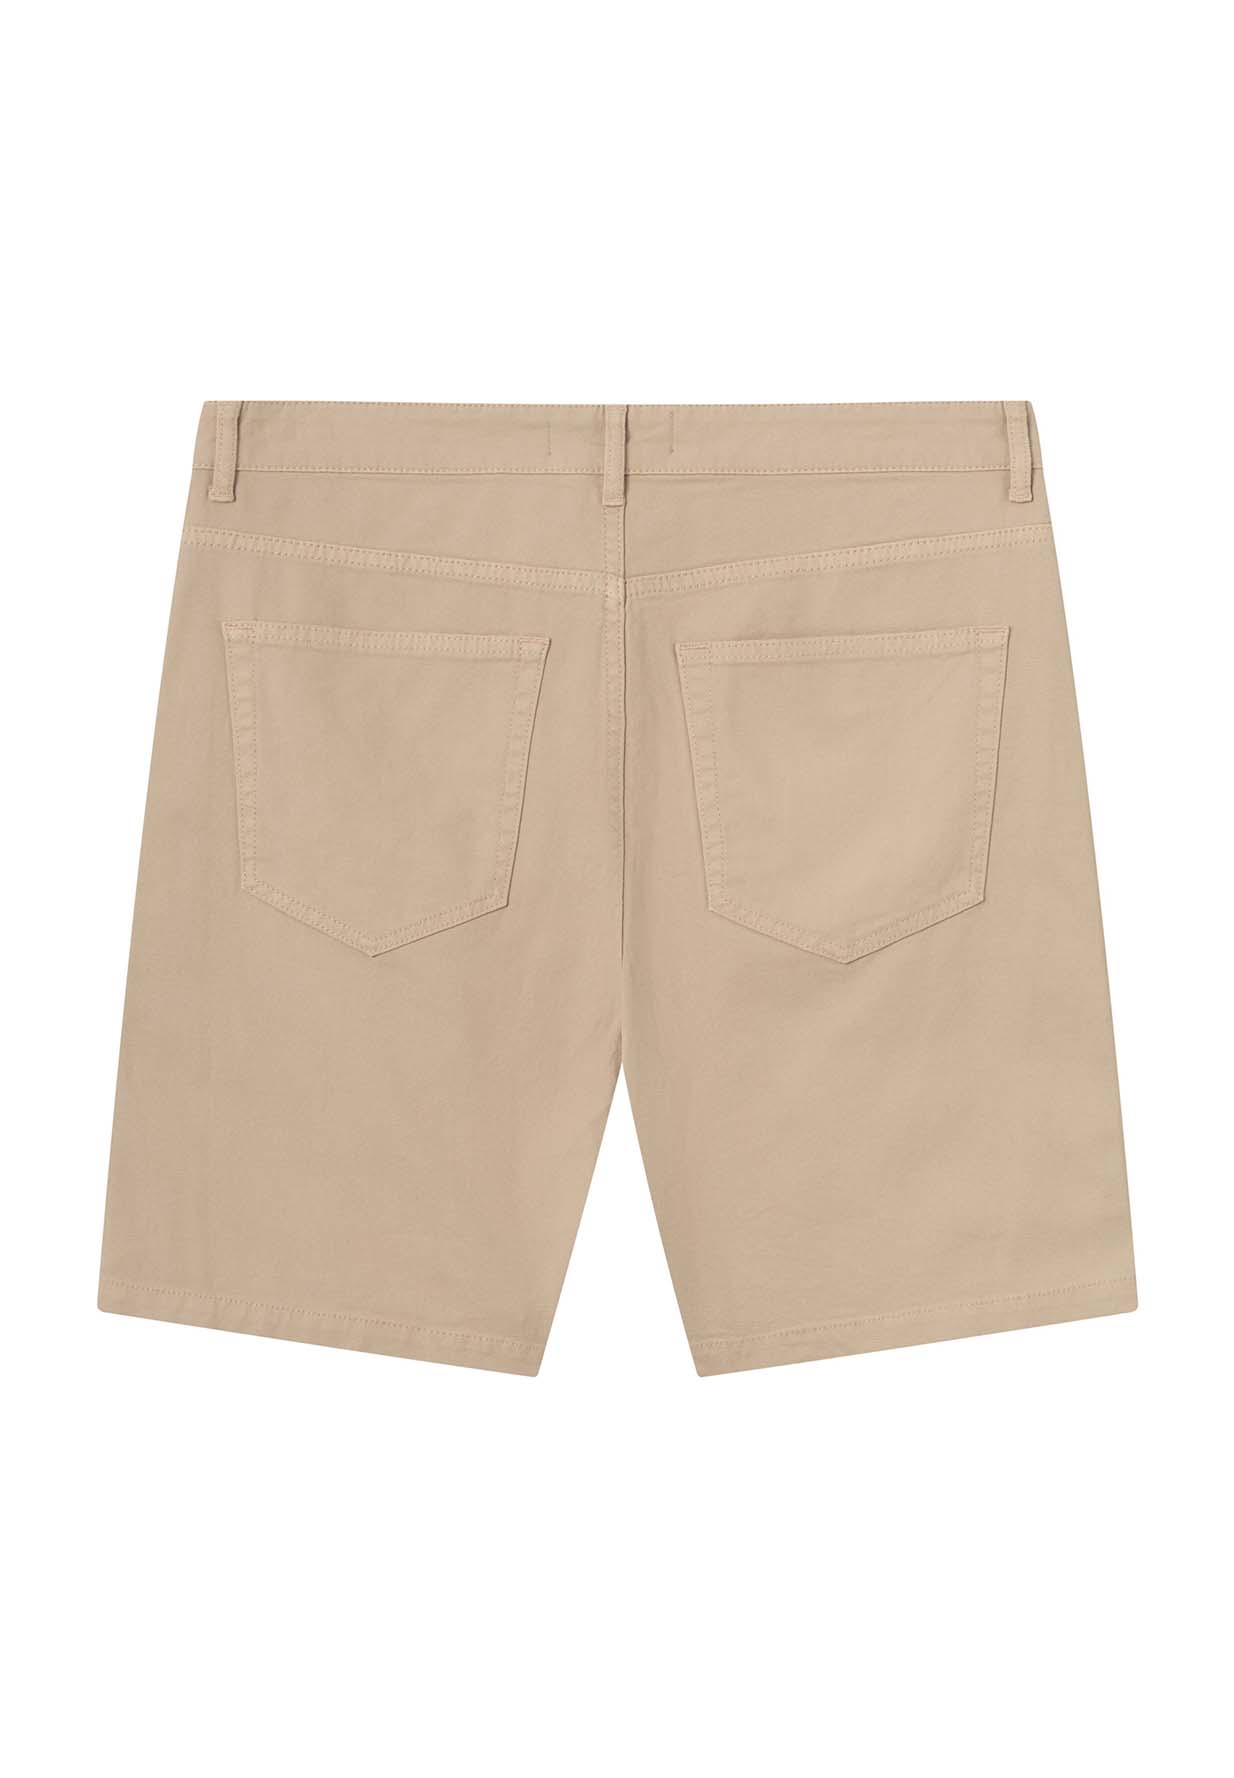 KNOWLEDGECOTTON APPAREL Loose 5-Pocket Canvas Twill Shorts light feather gray 30